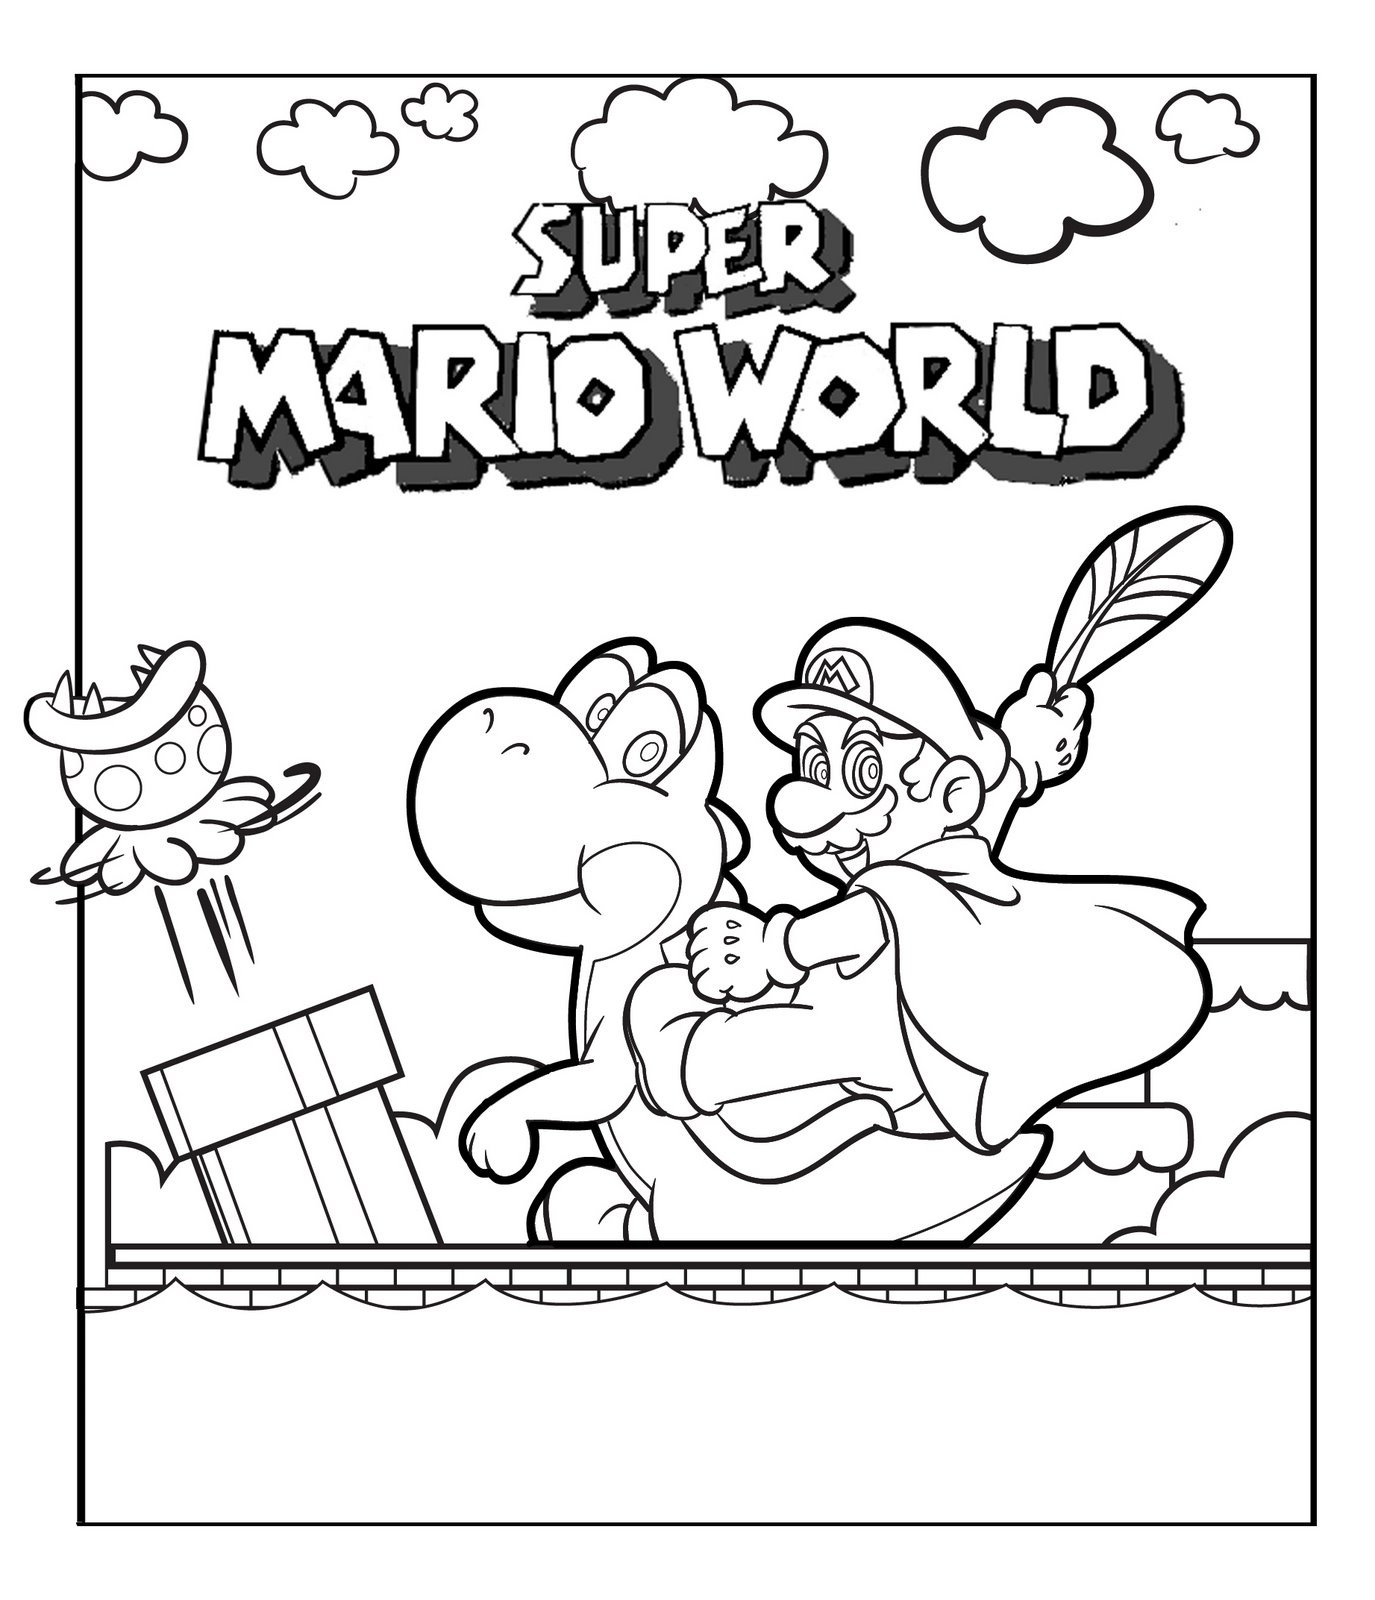 Mario Printable Coloring Pages
 Mario Coloring pages Black and white super Mario